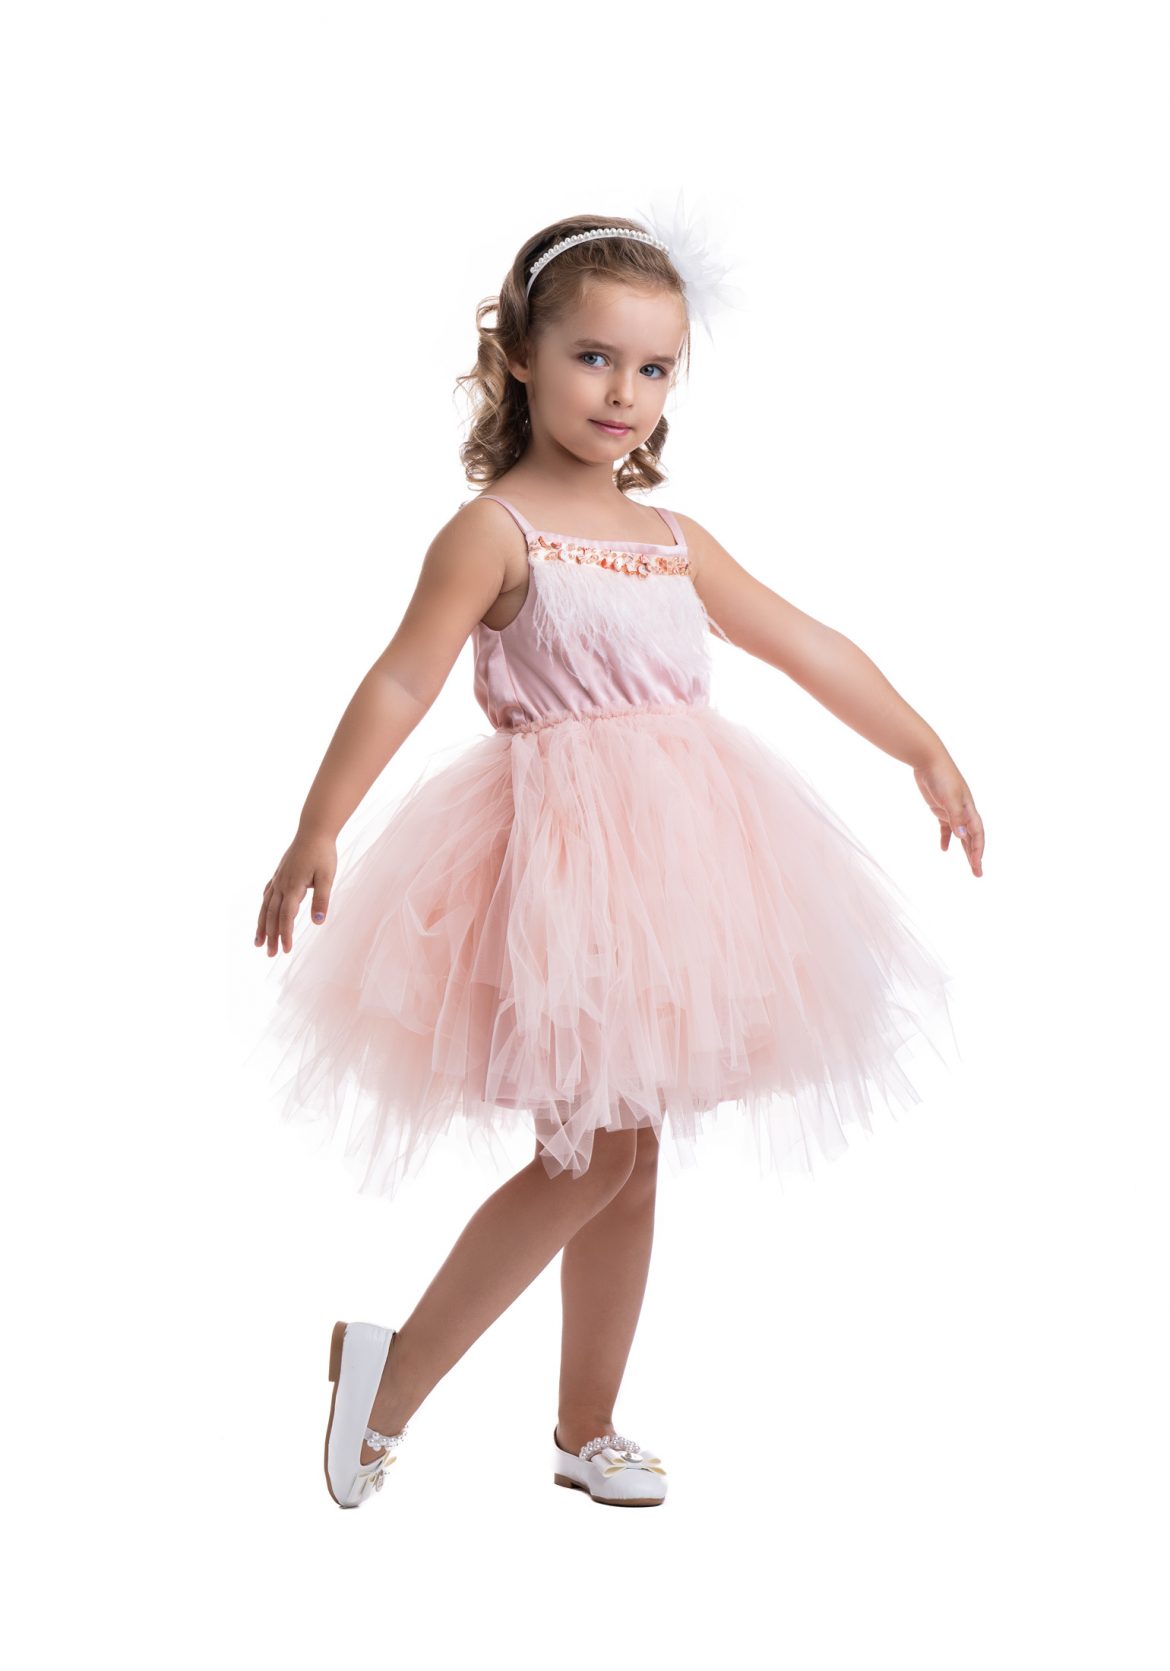 PINKY DREAMY DRESS FOR YOUR LITTLE PRINCESS